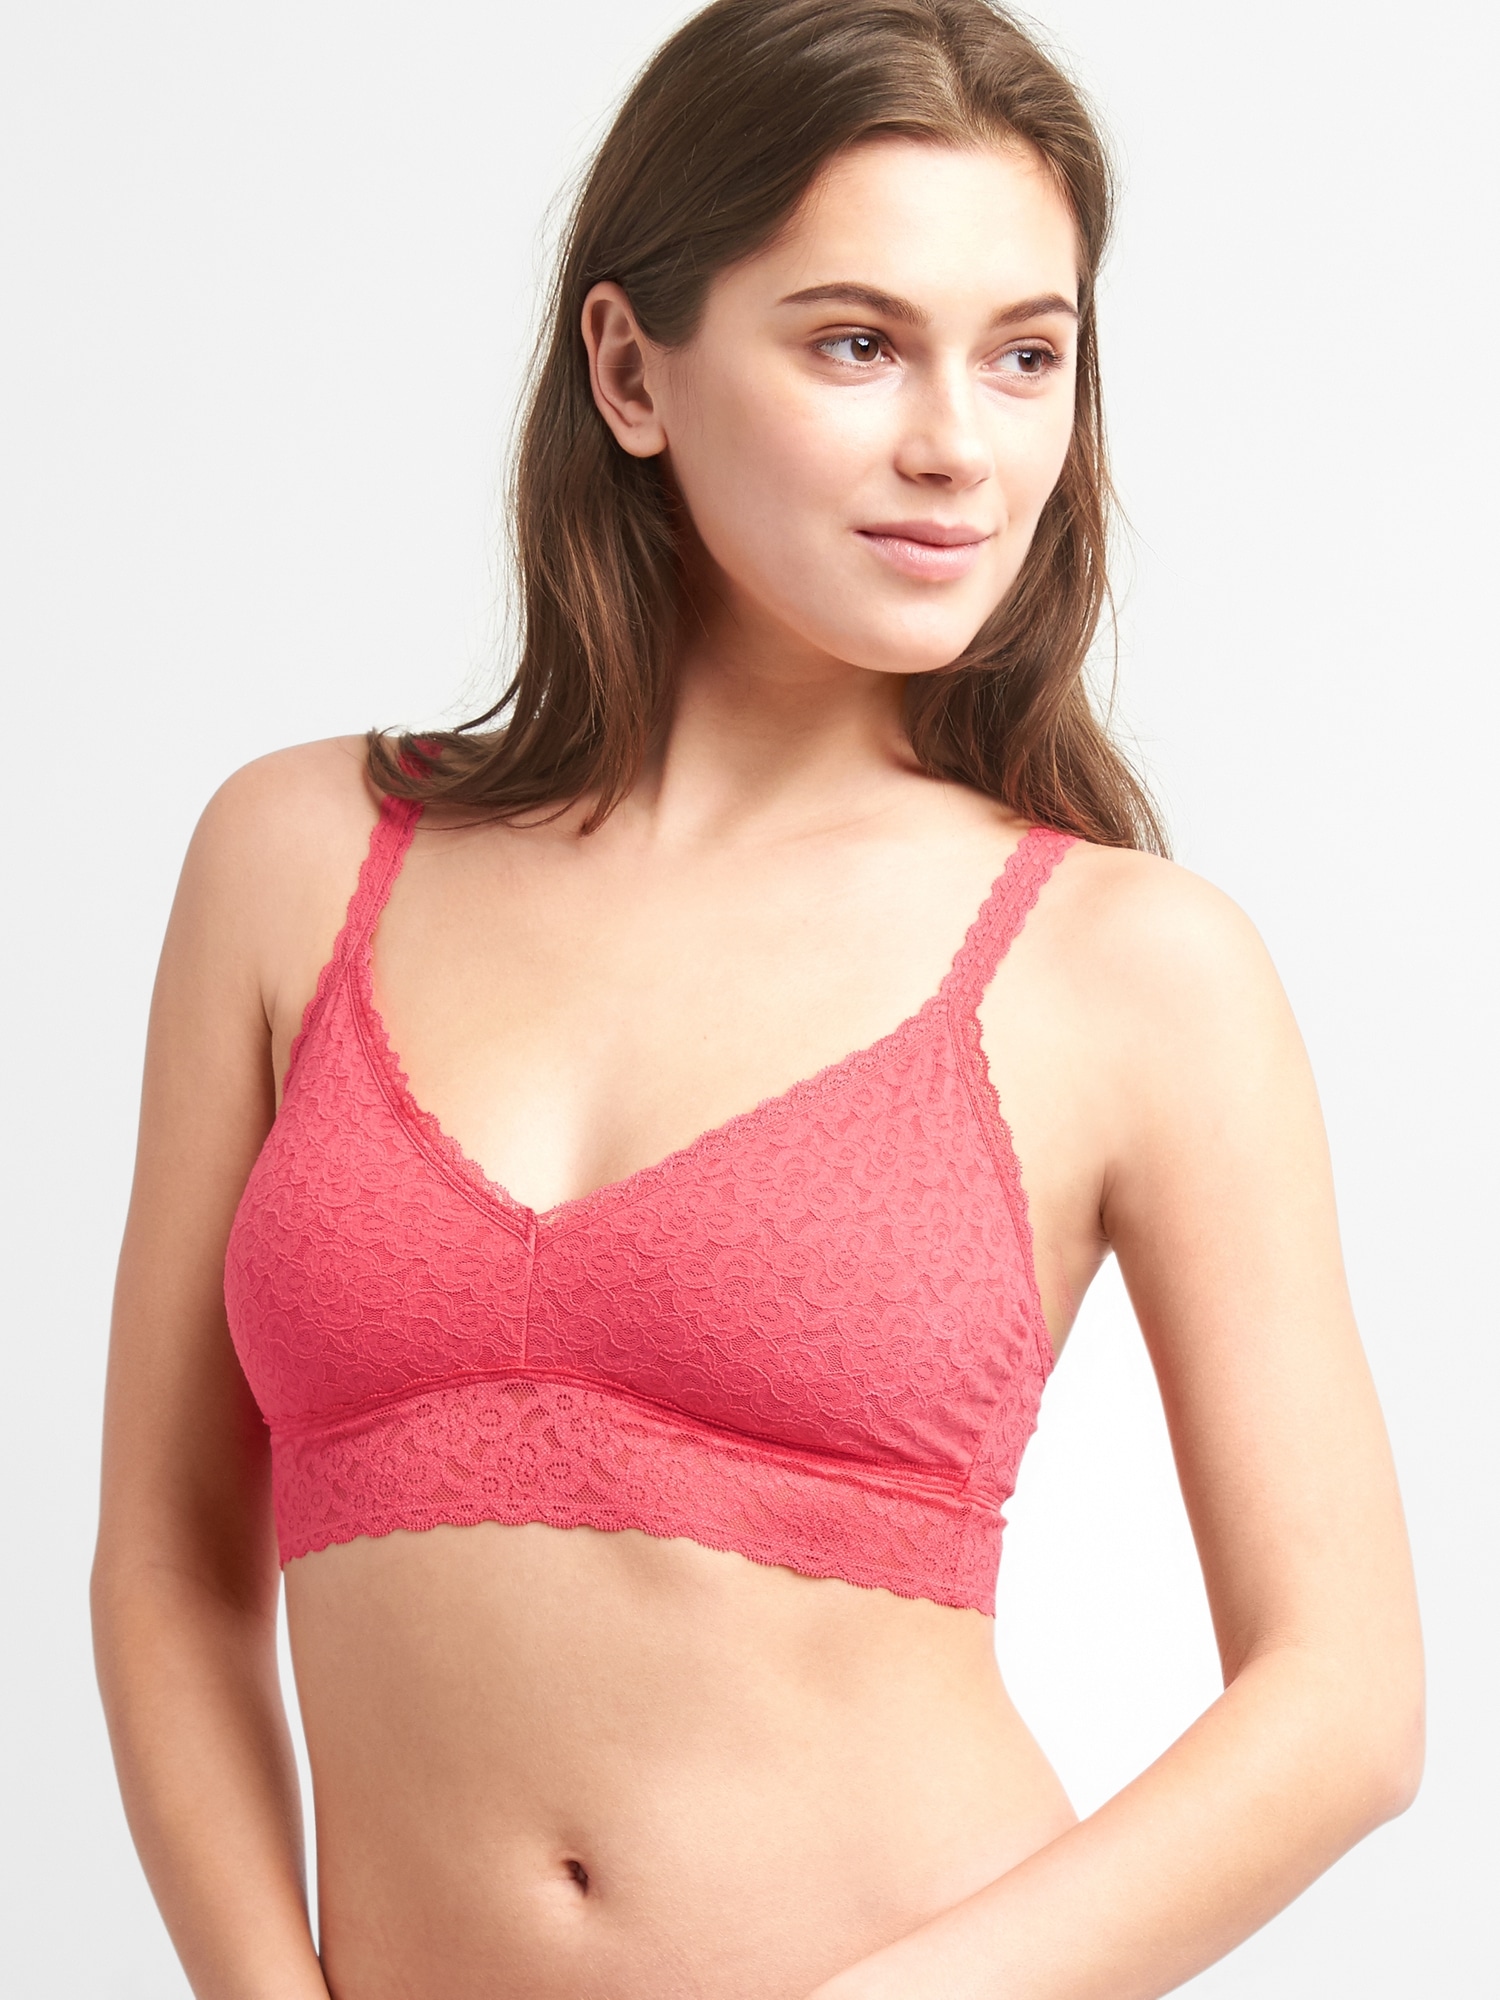 Brand new Gap Body Bras with lace